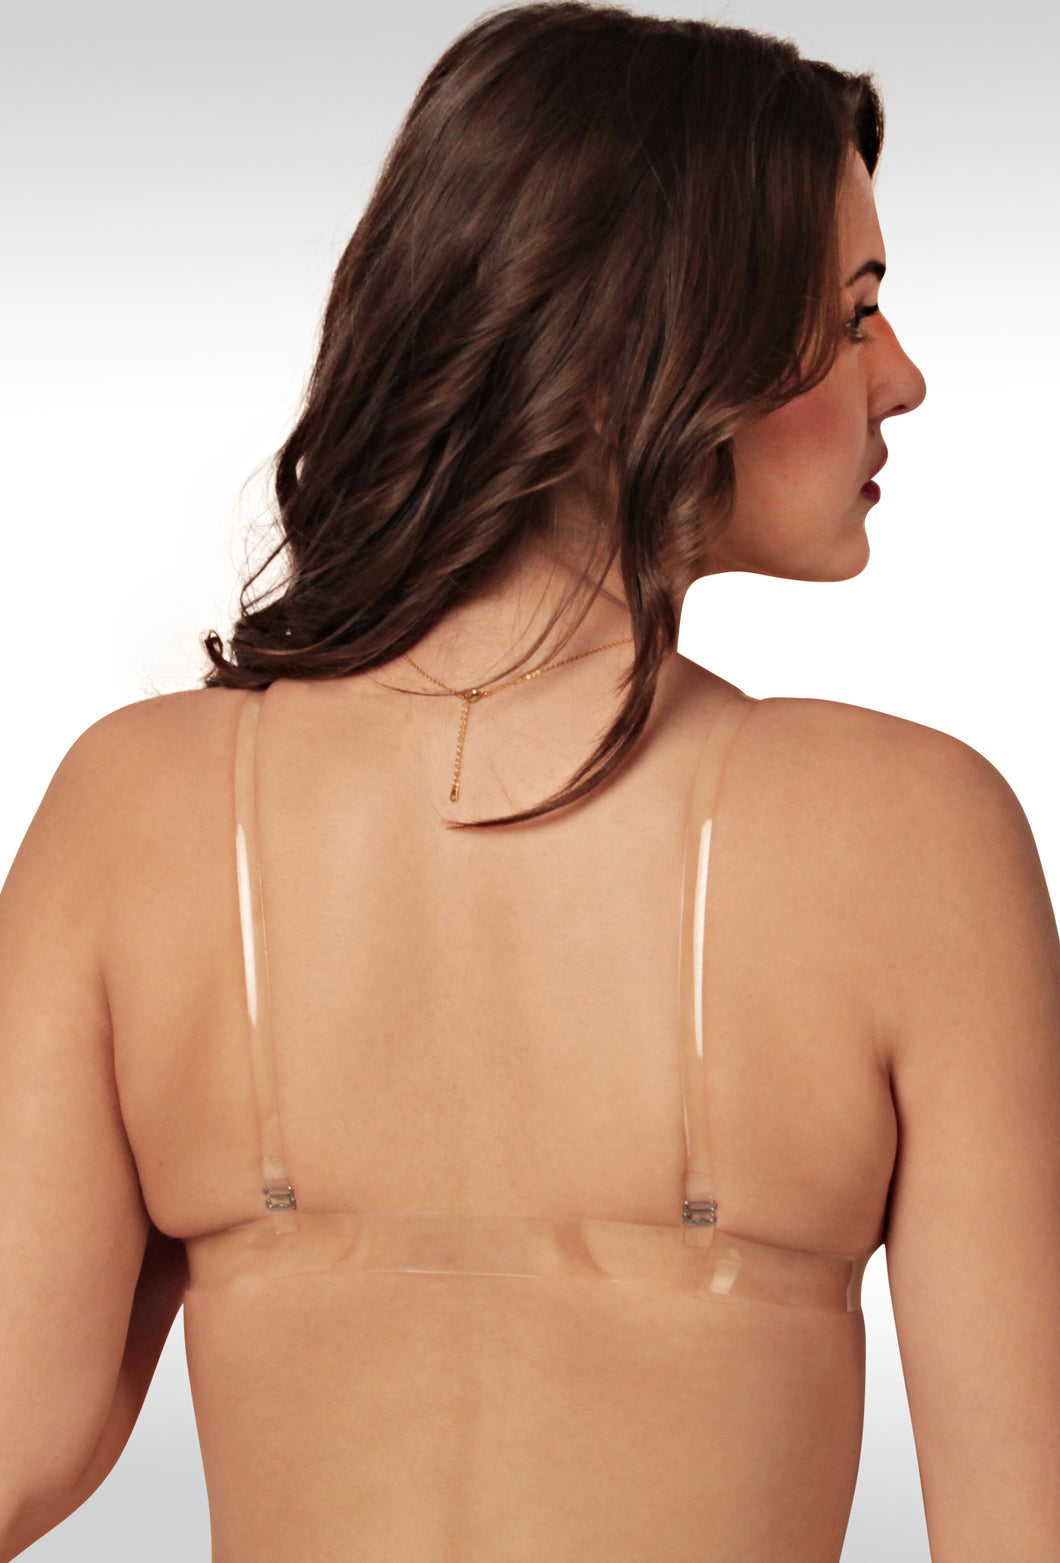 Lwear Women's Strapless Backless Clear Back Straps India